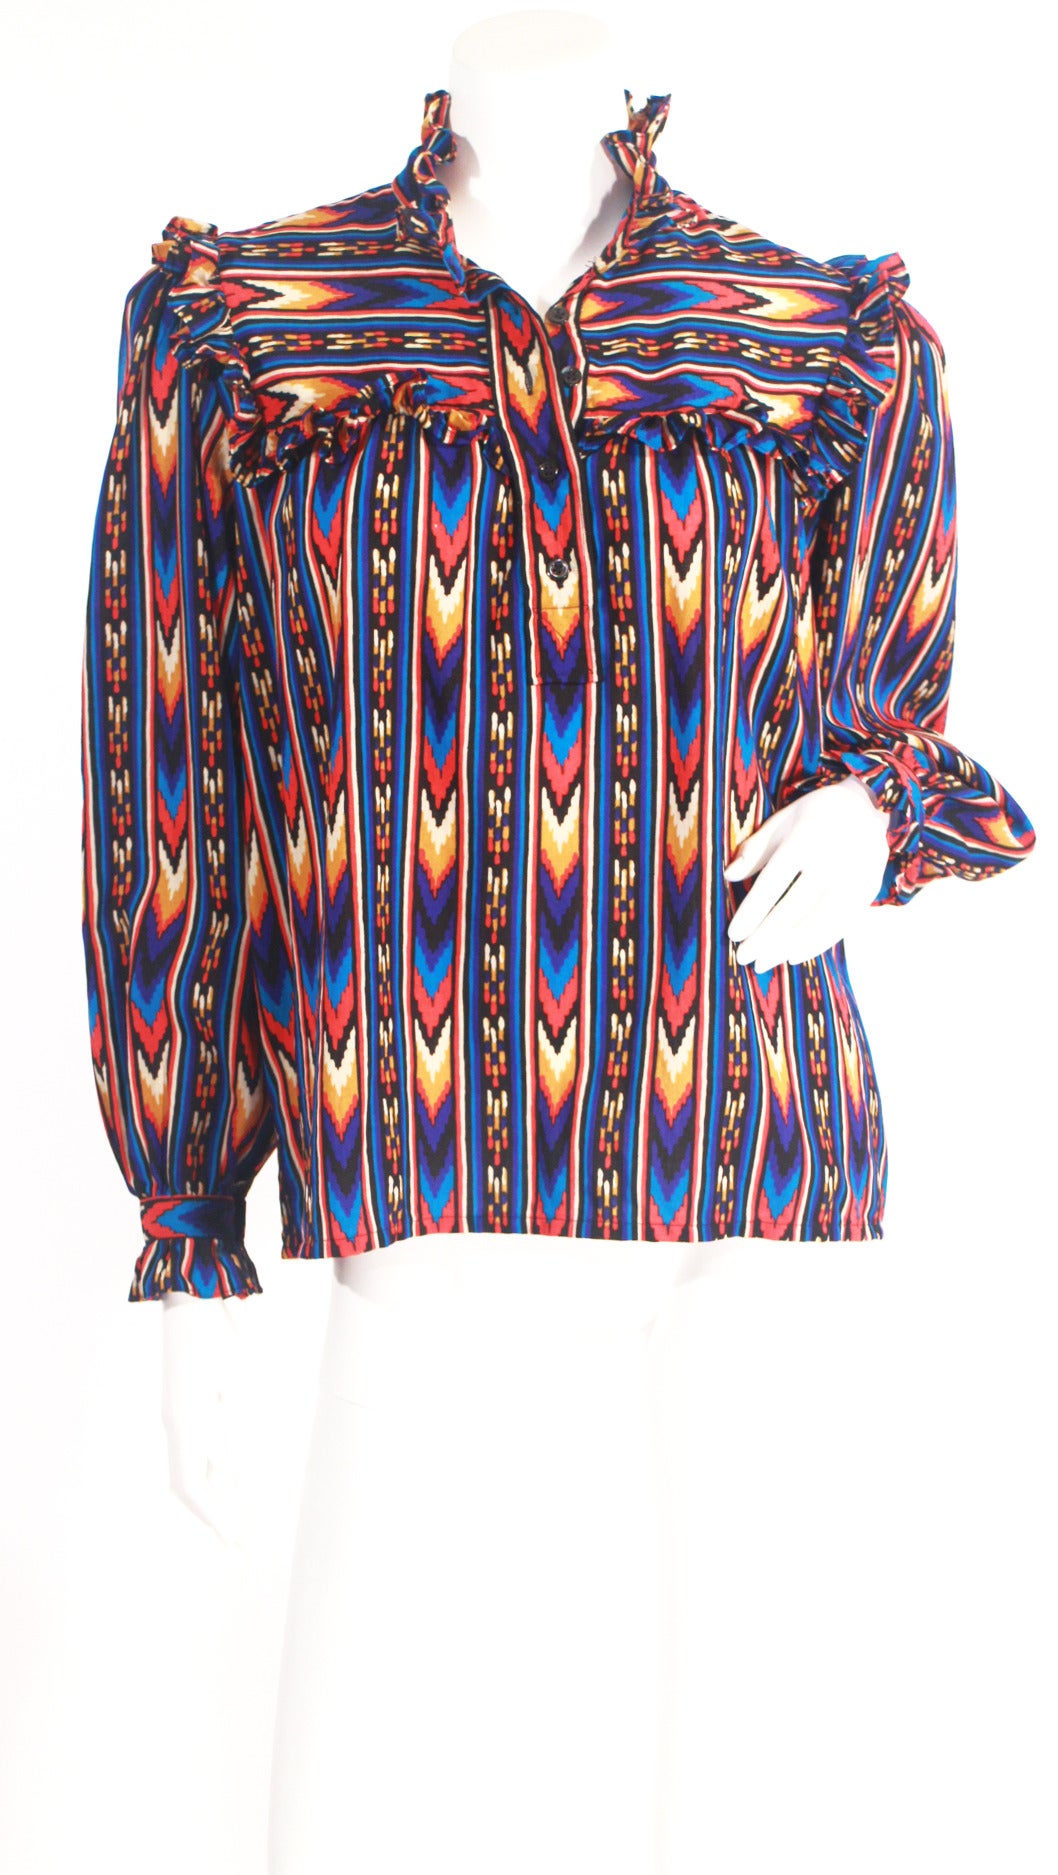 Super cool vintage 1970's YSL multi colored chevron print blouse. The print is very boho chic, perfect for the fall! Blouse features: ruffled collar, cuffs, four buttons, and neck tie. The neck tie can be worn at the neck, waist, or even